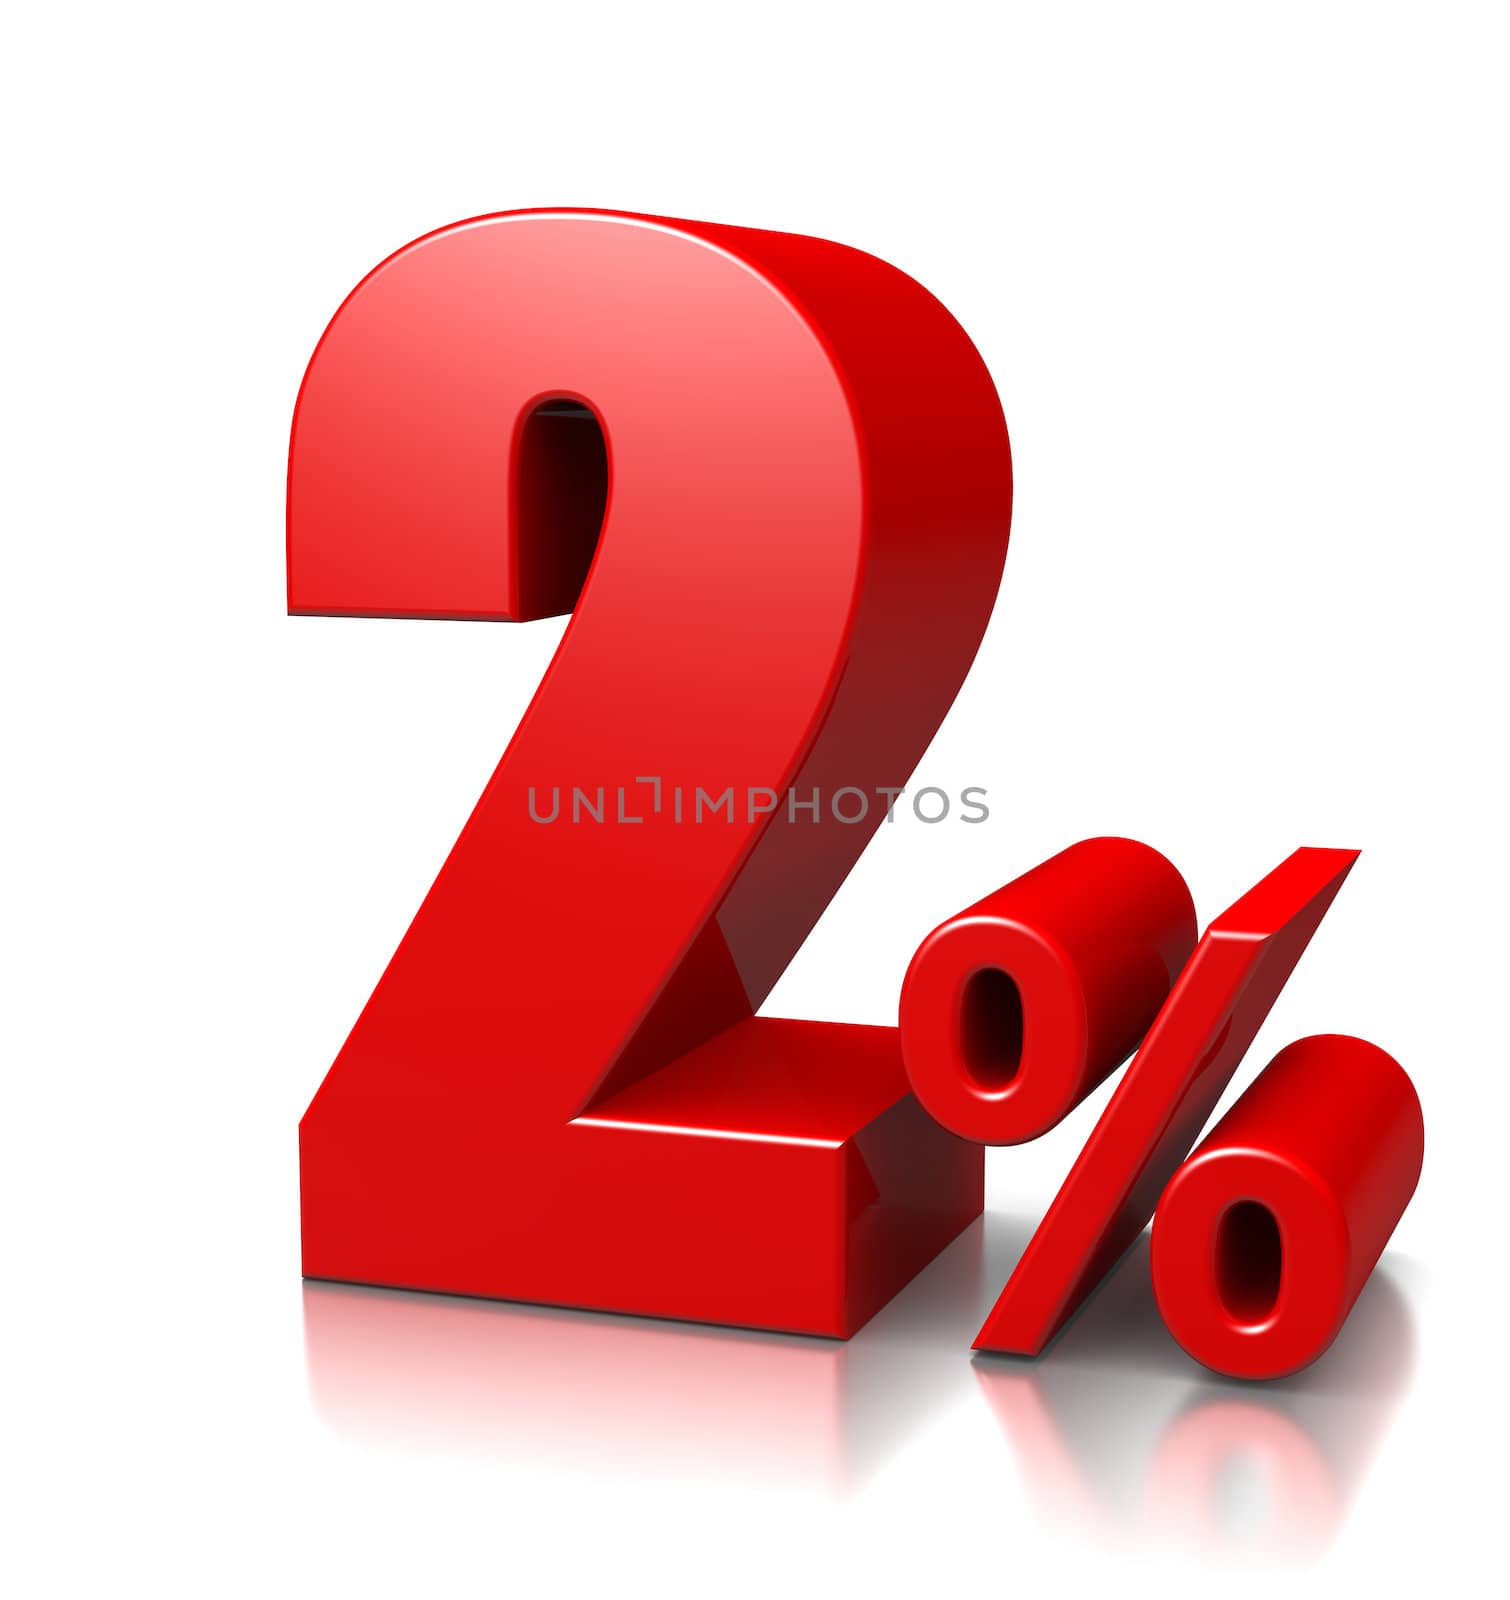 Red Two Percent Number on White Background 3D Illustration